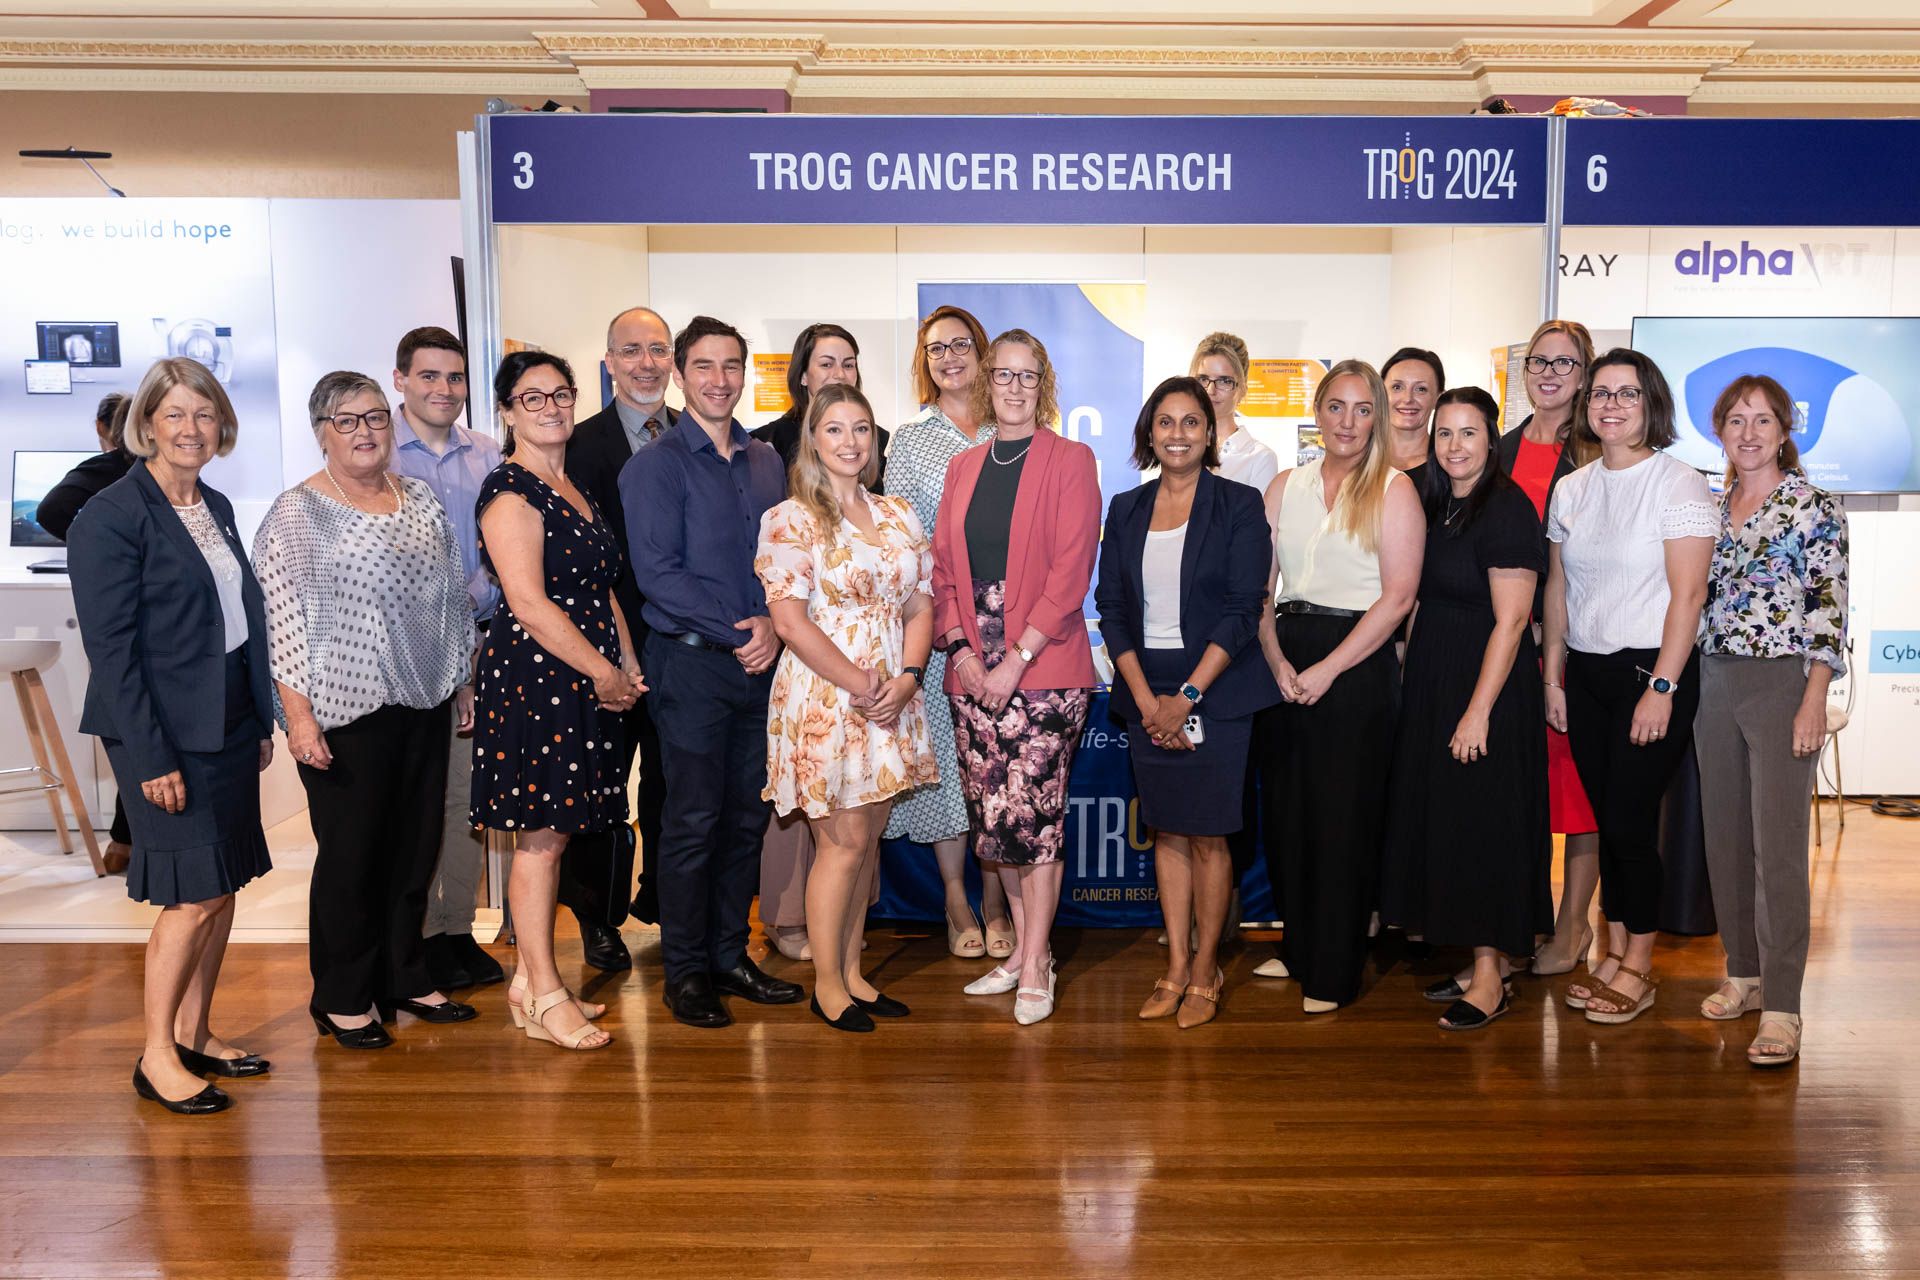 strategic plan mission values purpose, Mission and Values, TROG Cancer Research